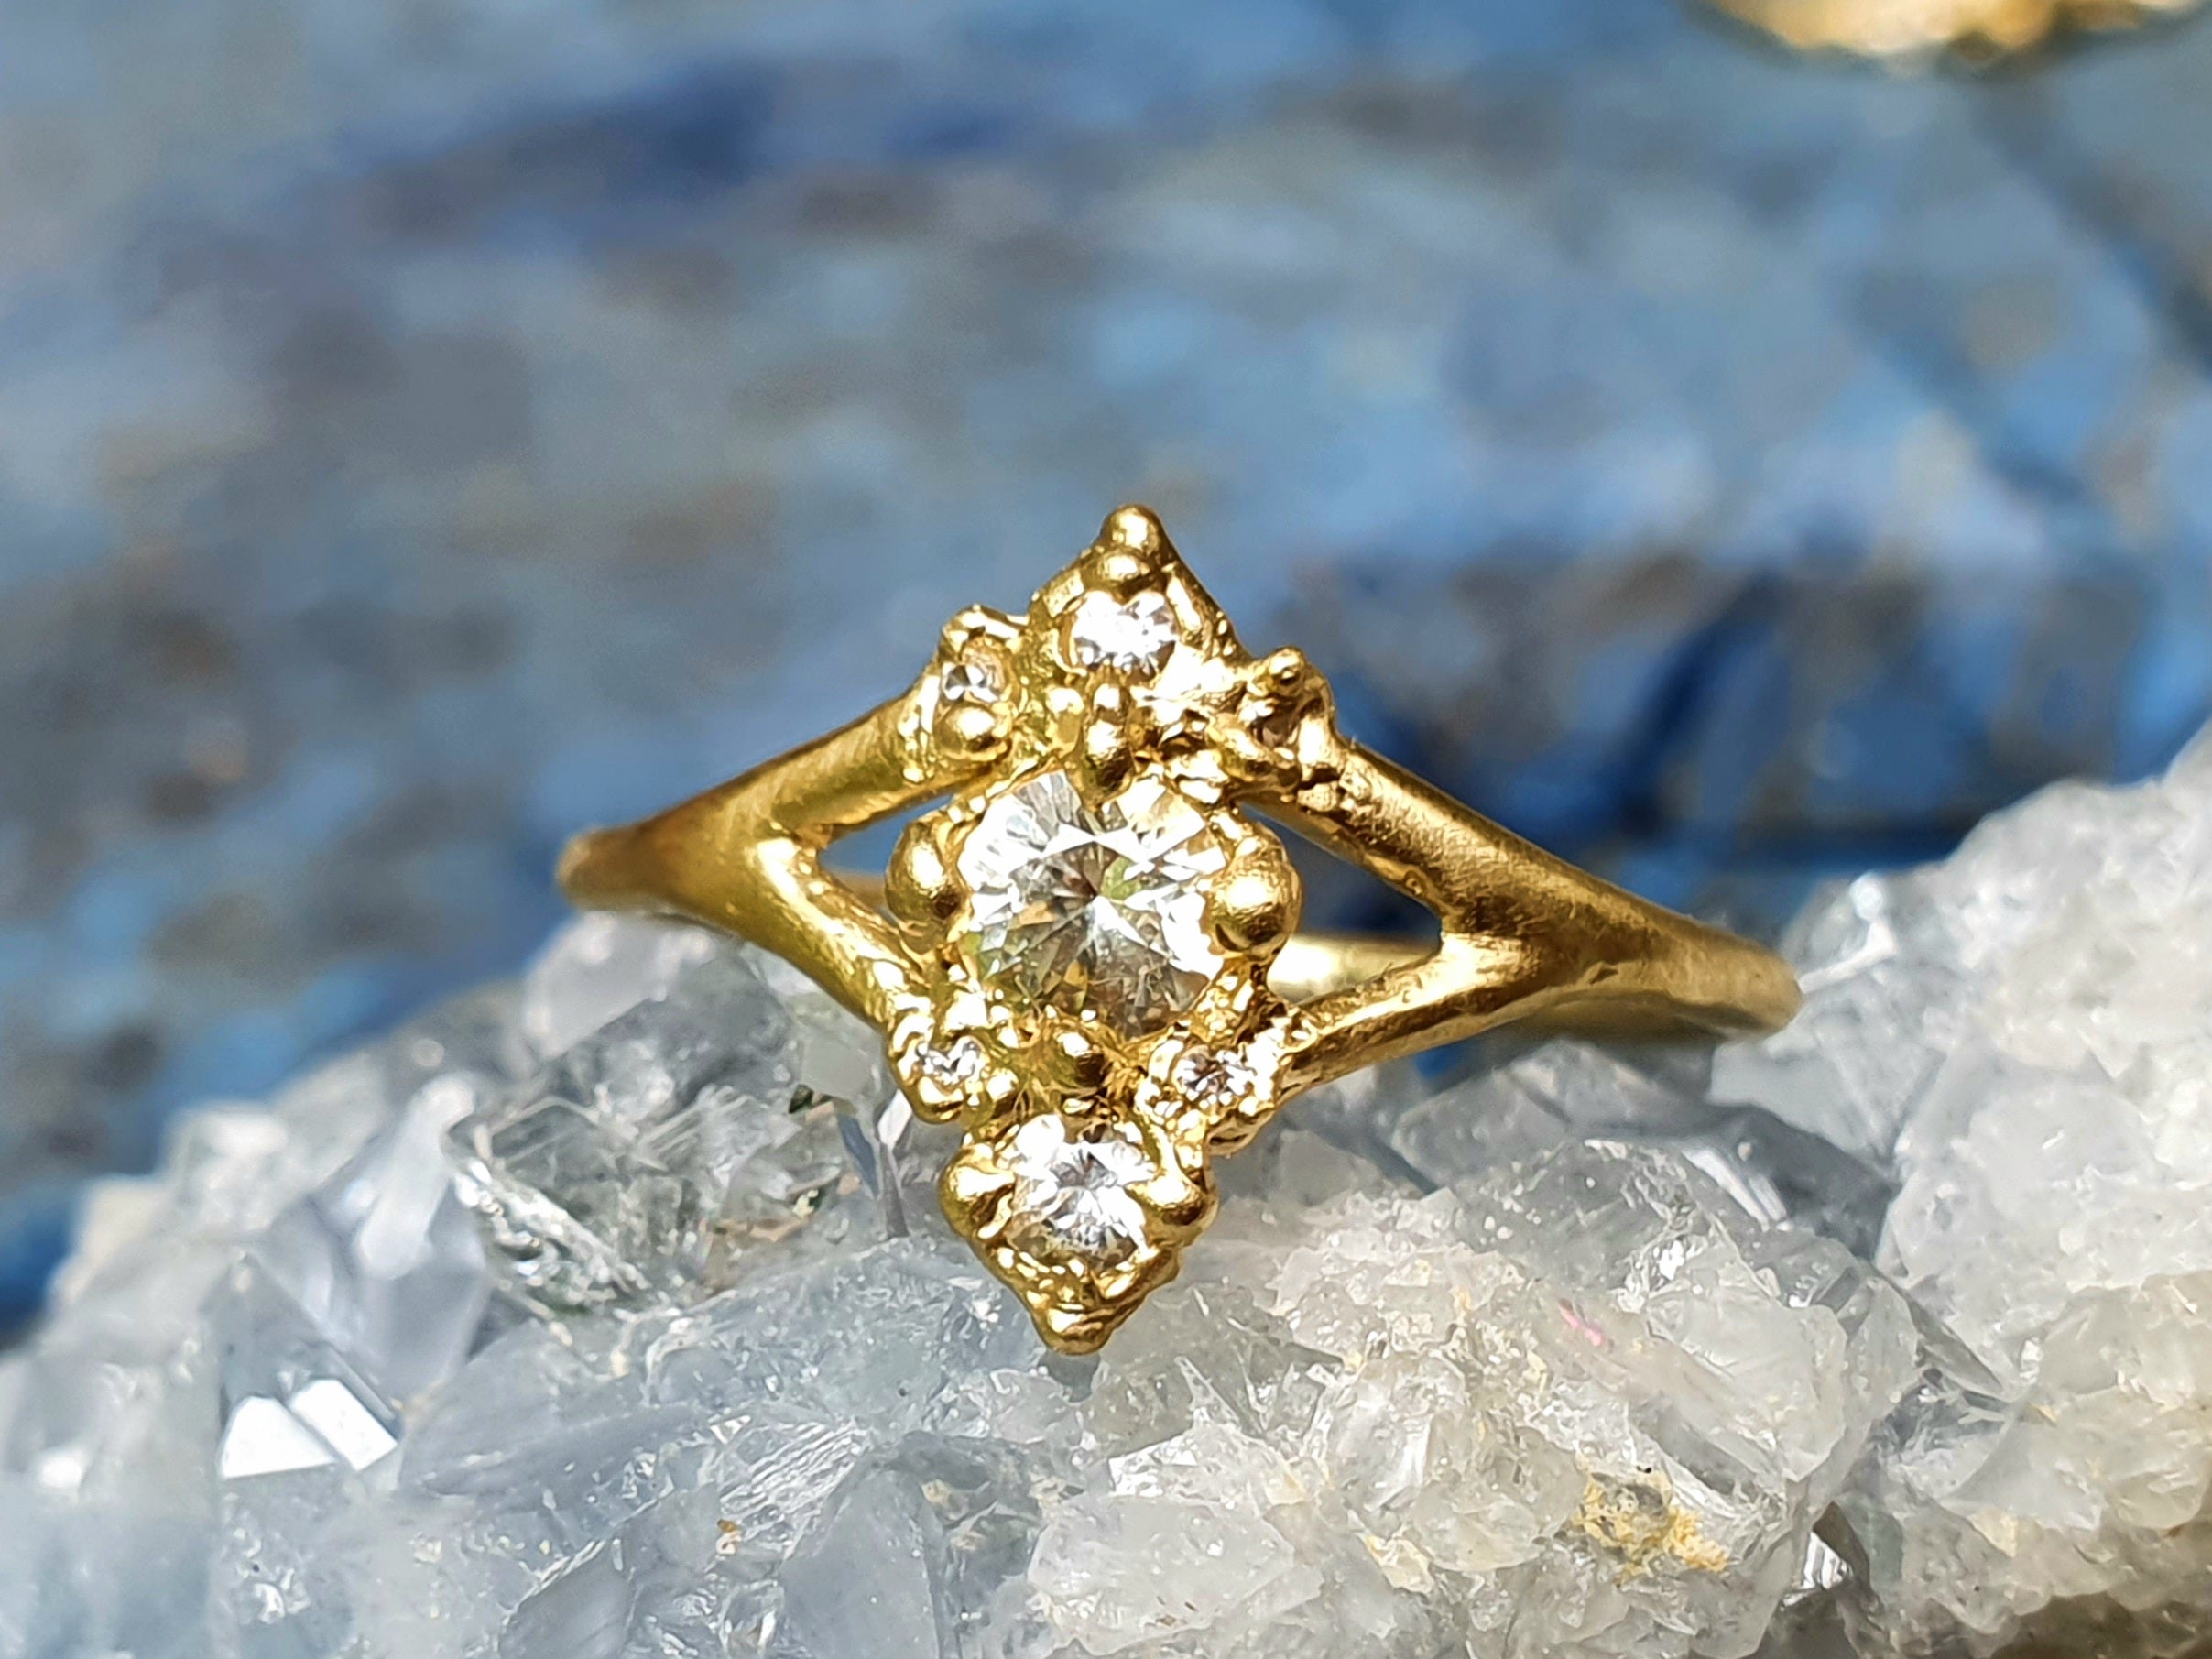 Astral ring - 9k gold and white sapphire ring